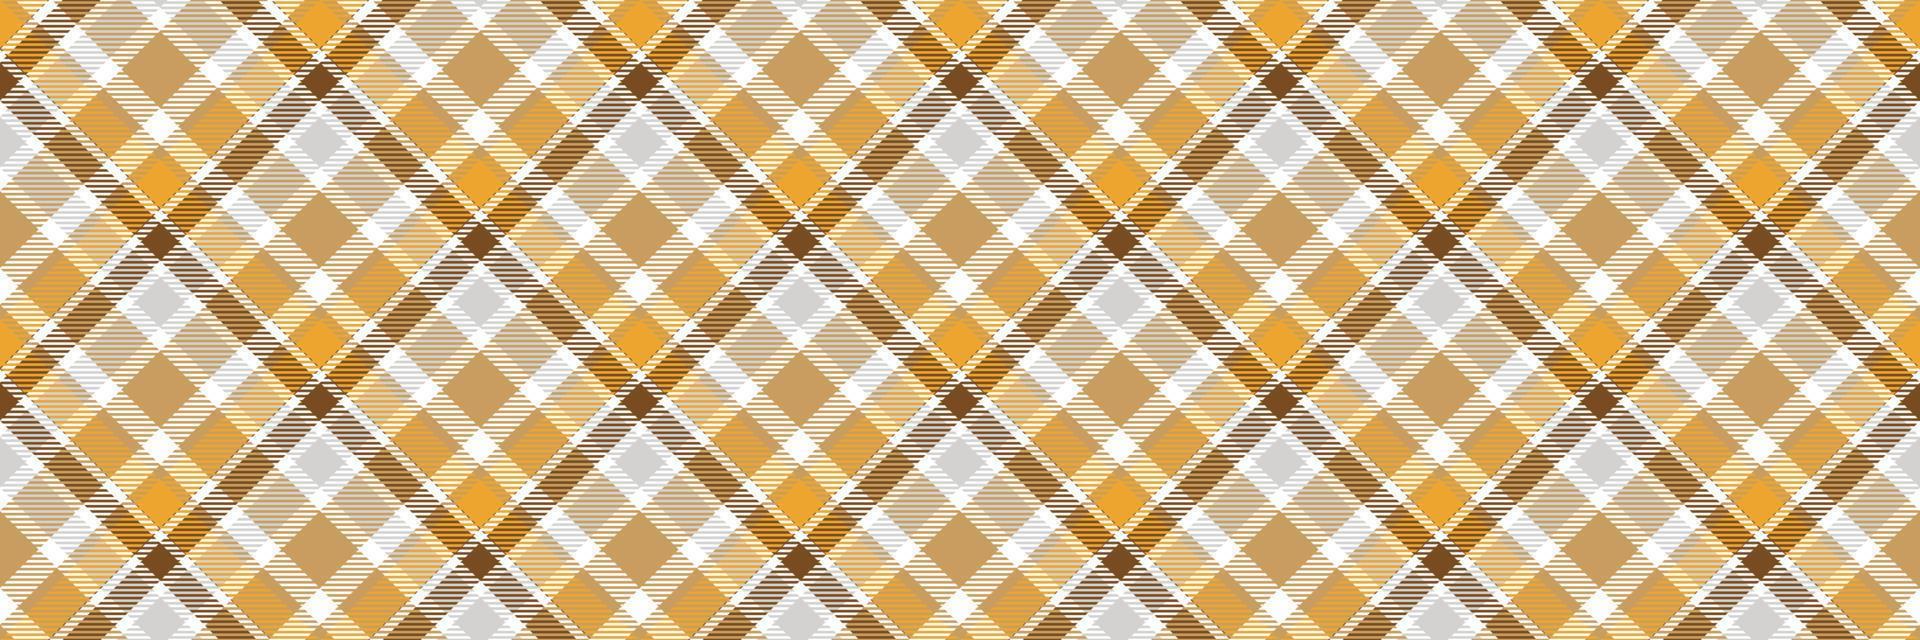 Check Scottish tartan pattern is a patterned cloth consisting of criss crossed, horizontal and vertical bands in multiple colours.plaid Seamless for  scarf,pyjamas,blanket,duvet,kilt large shawl. vector